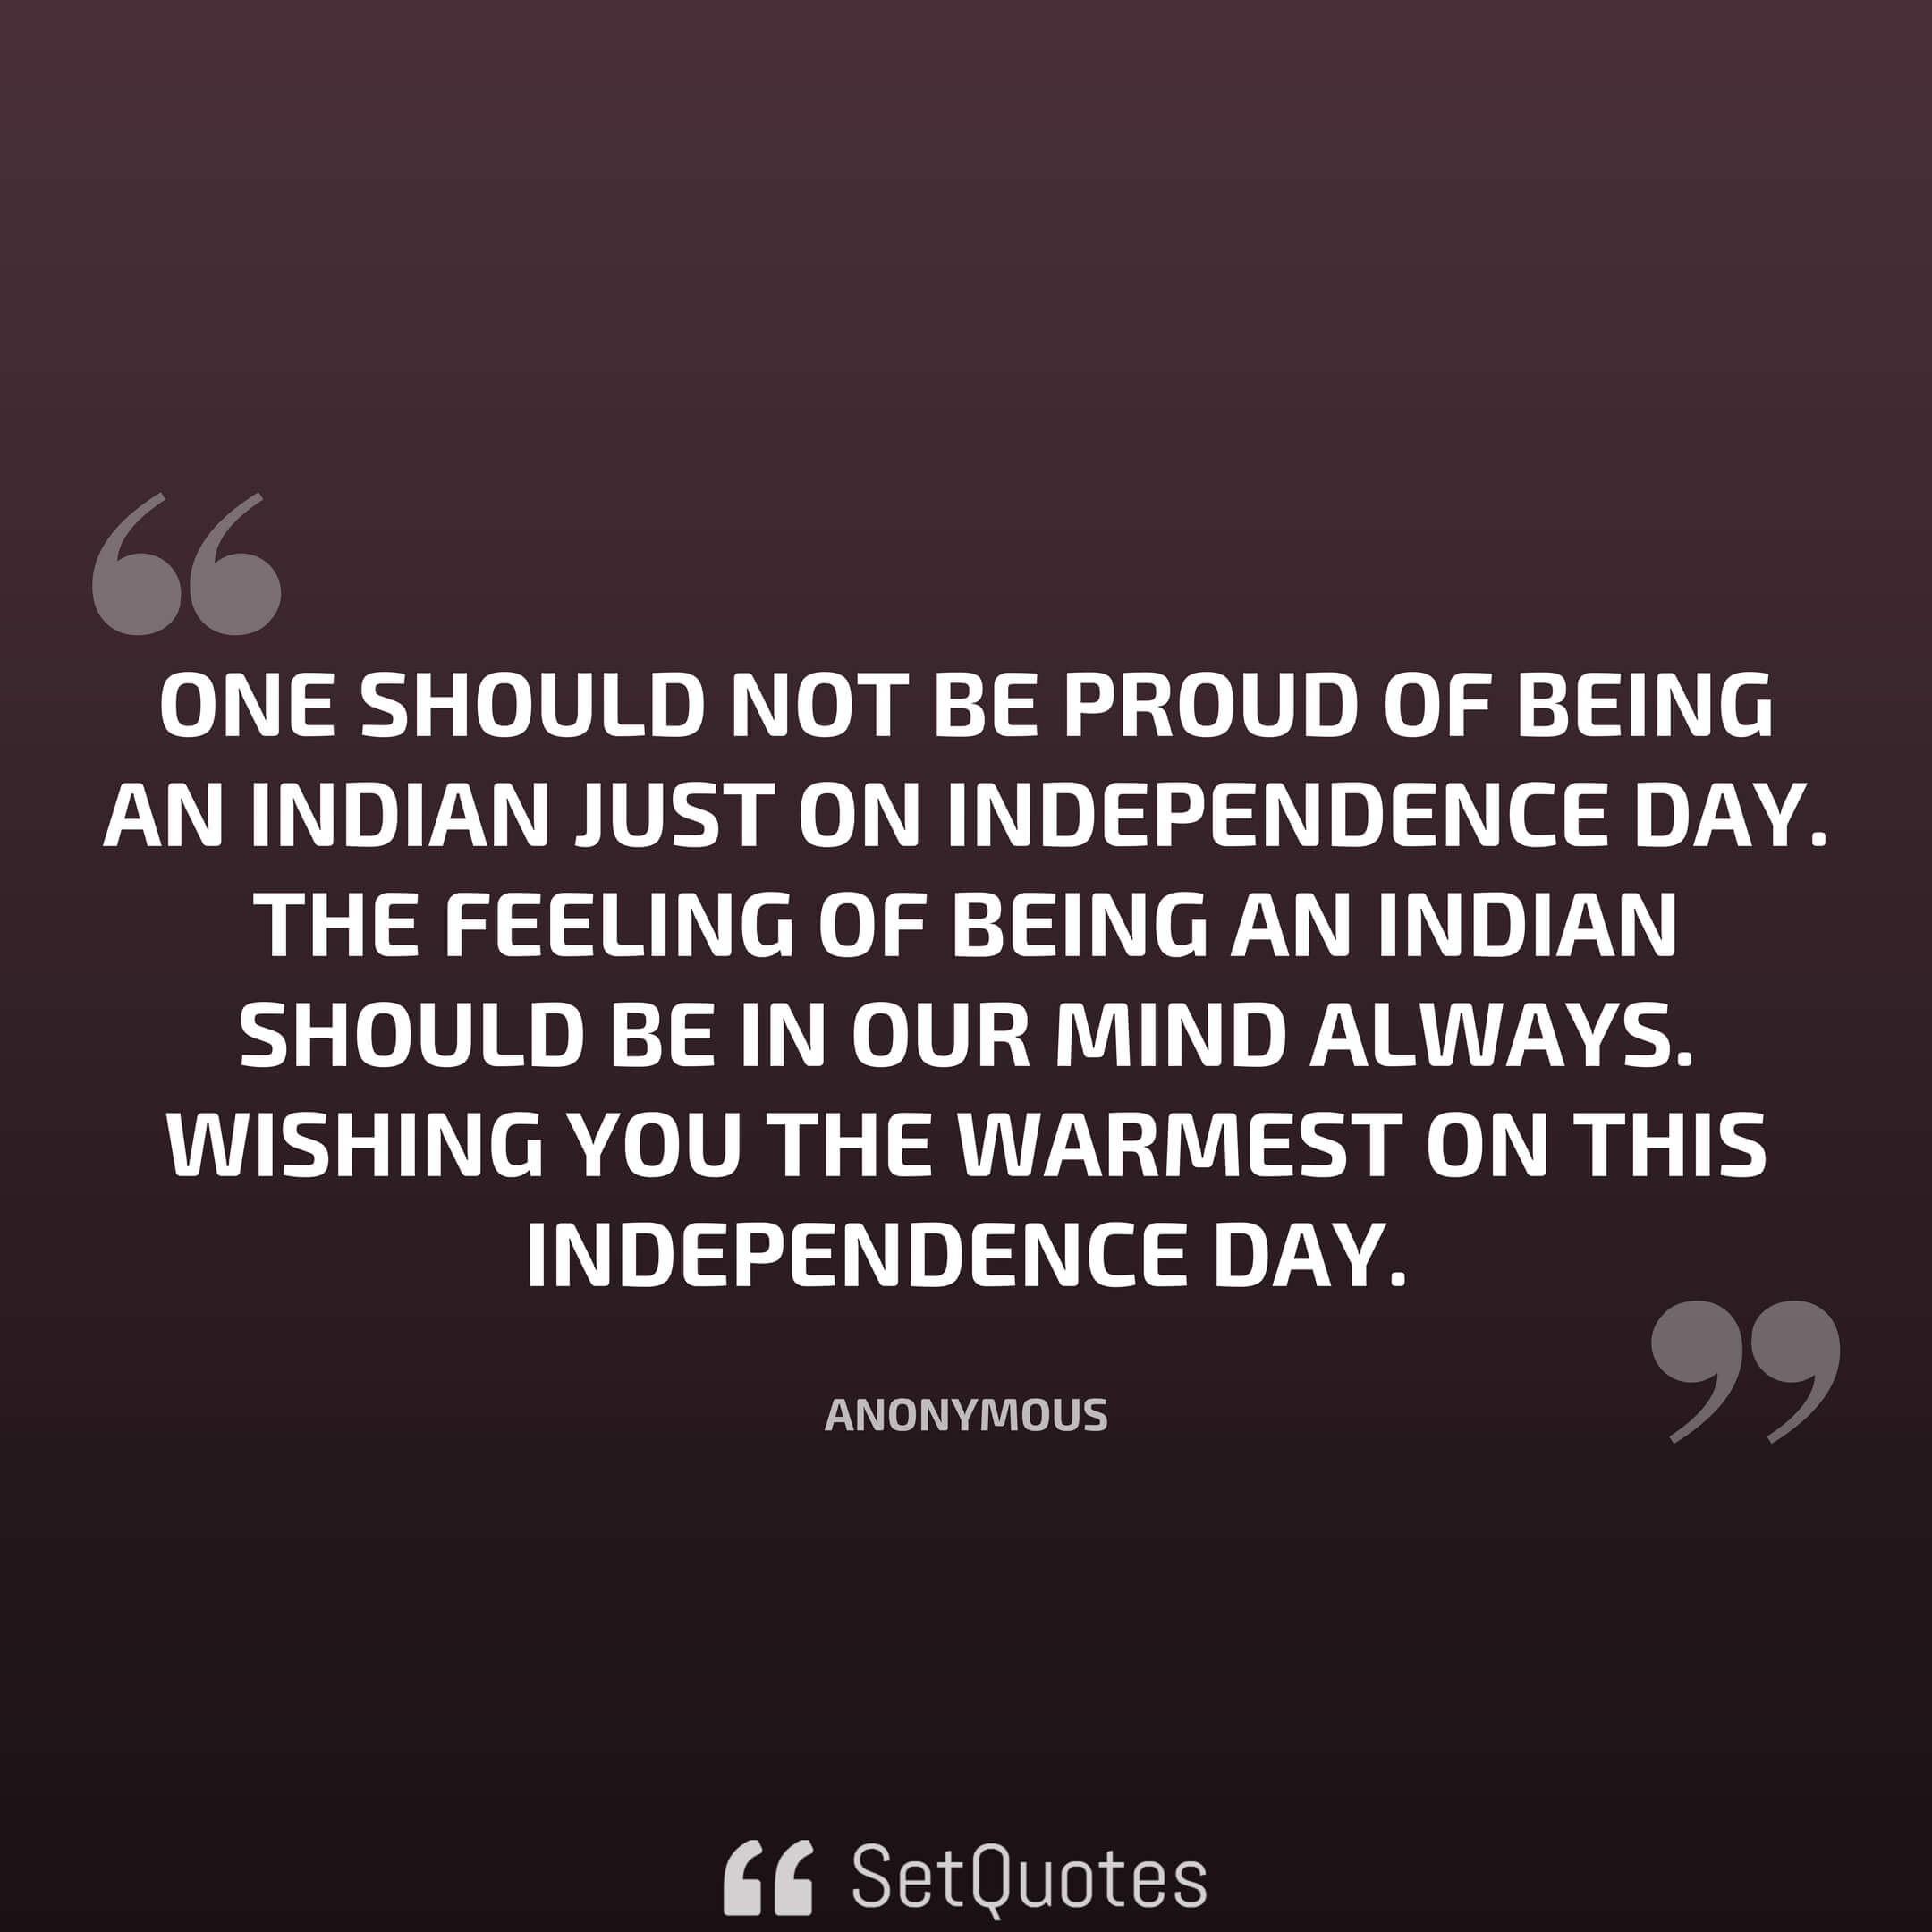 One should not be proud of being an Indian just on Independence Day. The feeling of being an Indian should be in our mind always. Wishing you the warmest on this Independence Day.